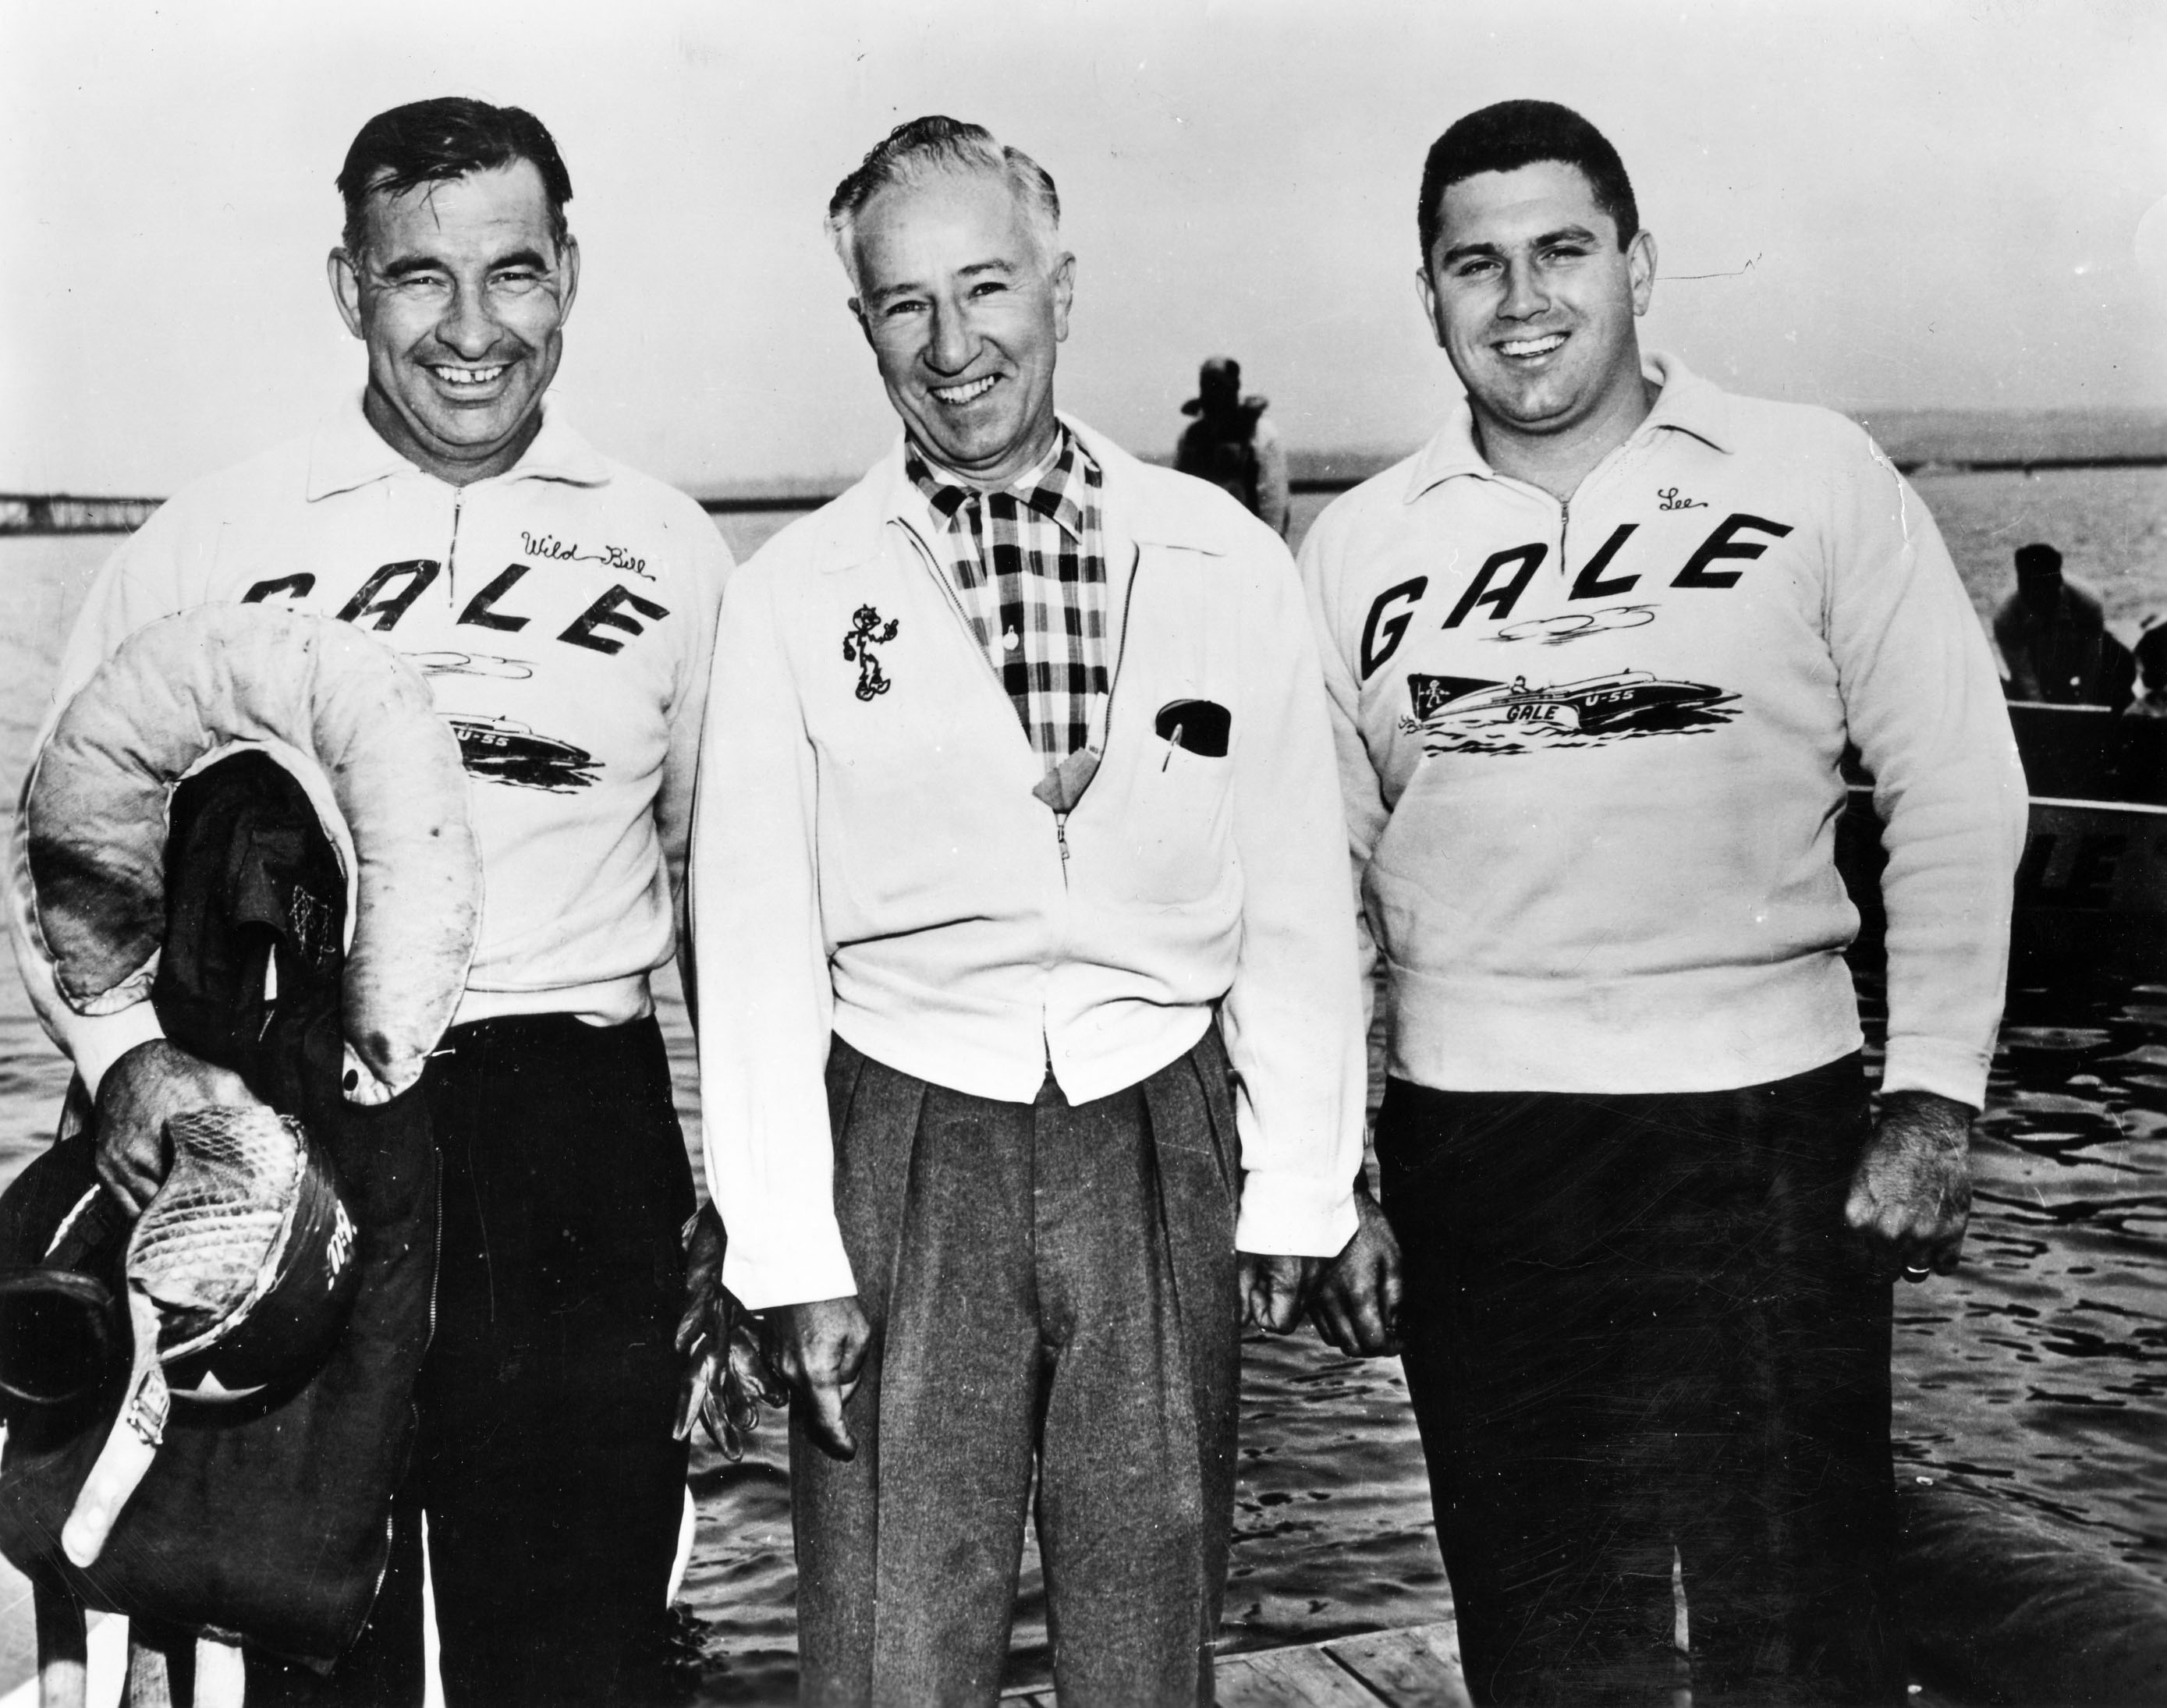 The Gale team of Bill Cantrell (left), Joe Schoenith (center) and Lee Schoenith.